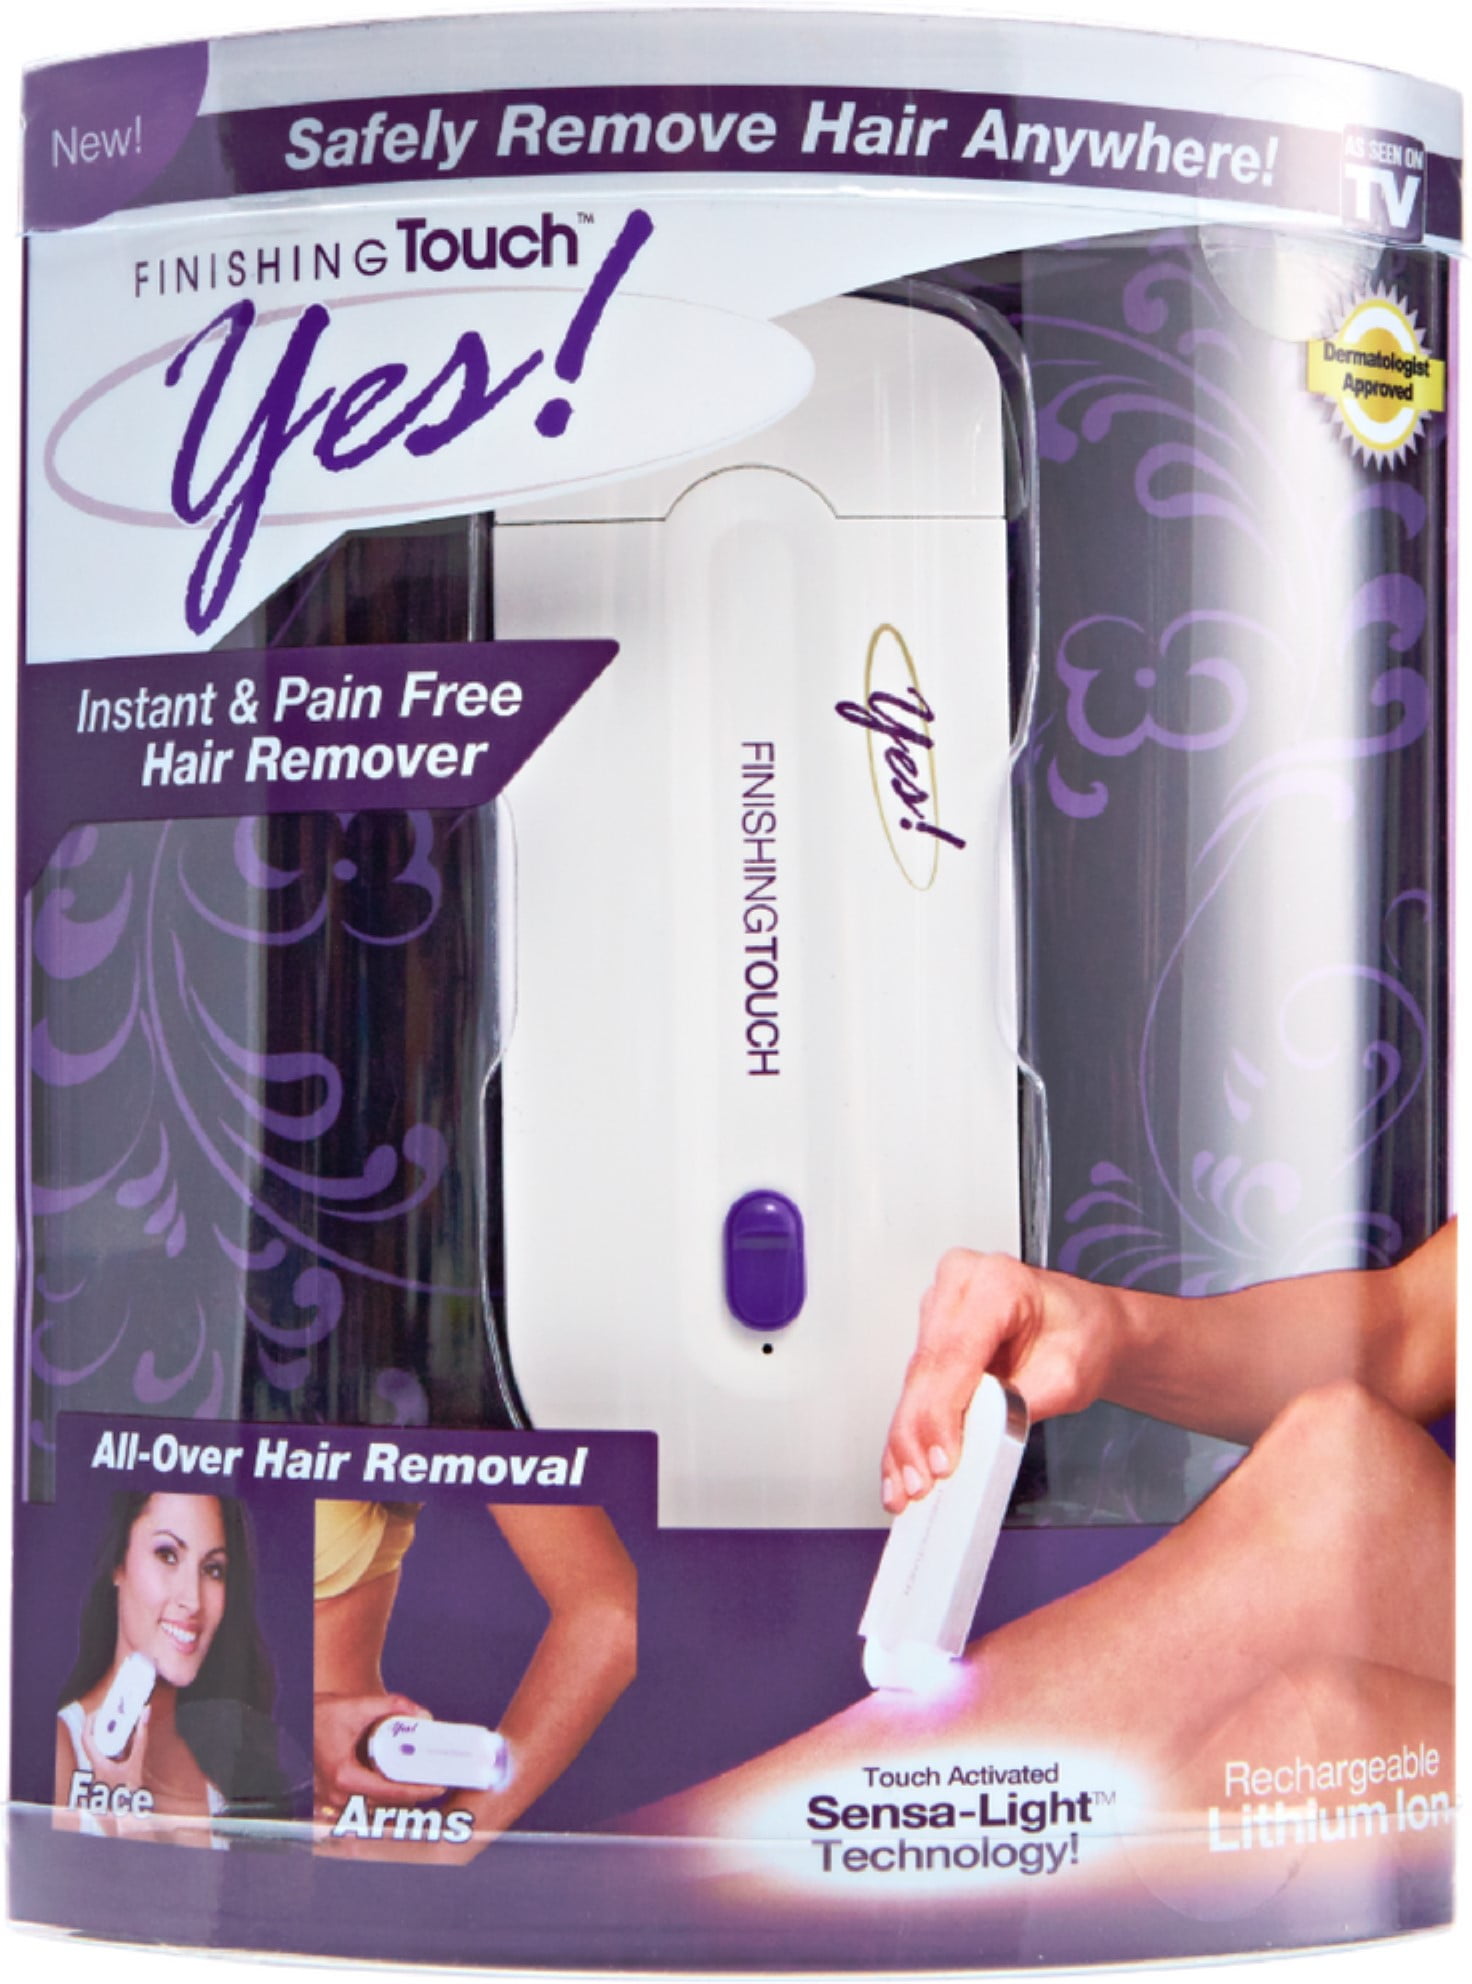 the finishing touch yes, the first allaround painless hair remover